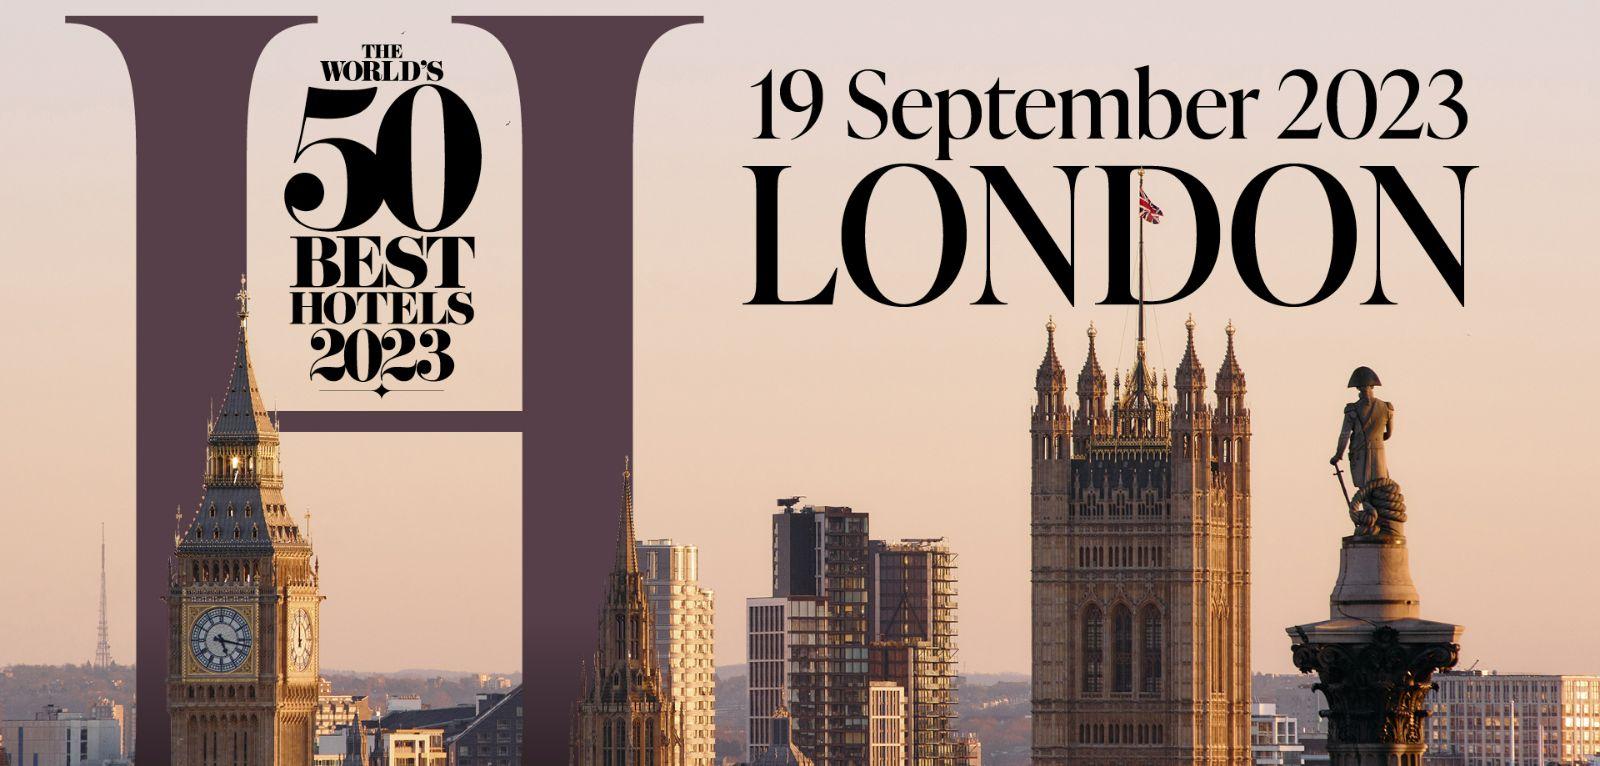 The Worlds 50 Best Hotels to be revealed in London